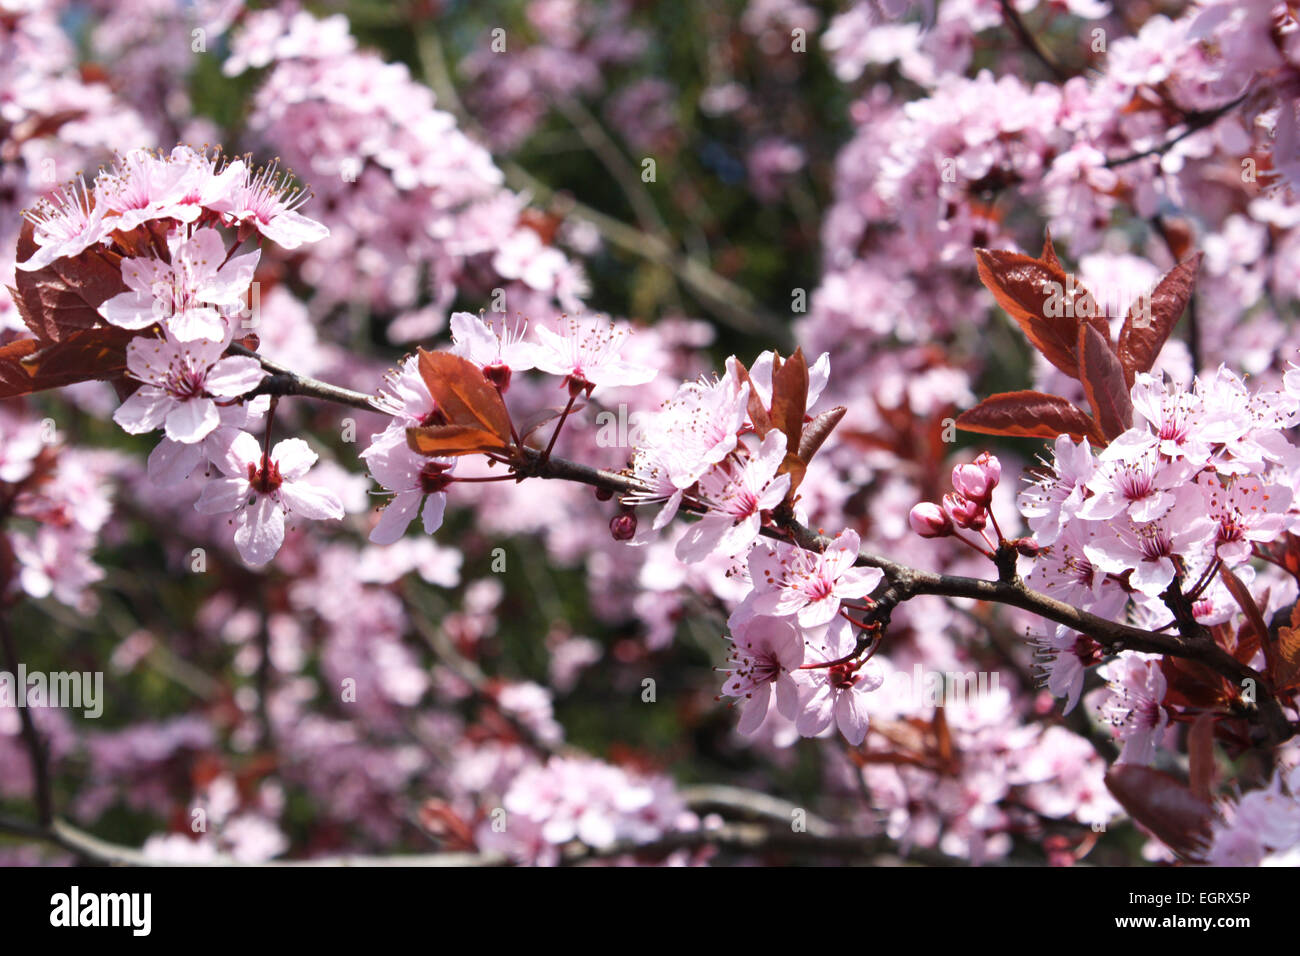 Pink cherry blossom flowers in spring season Stock Photo